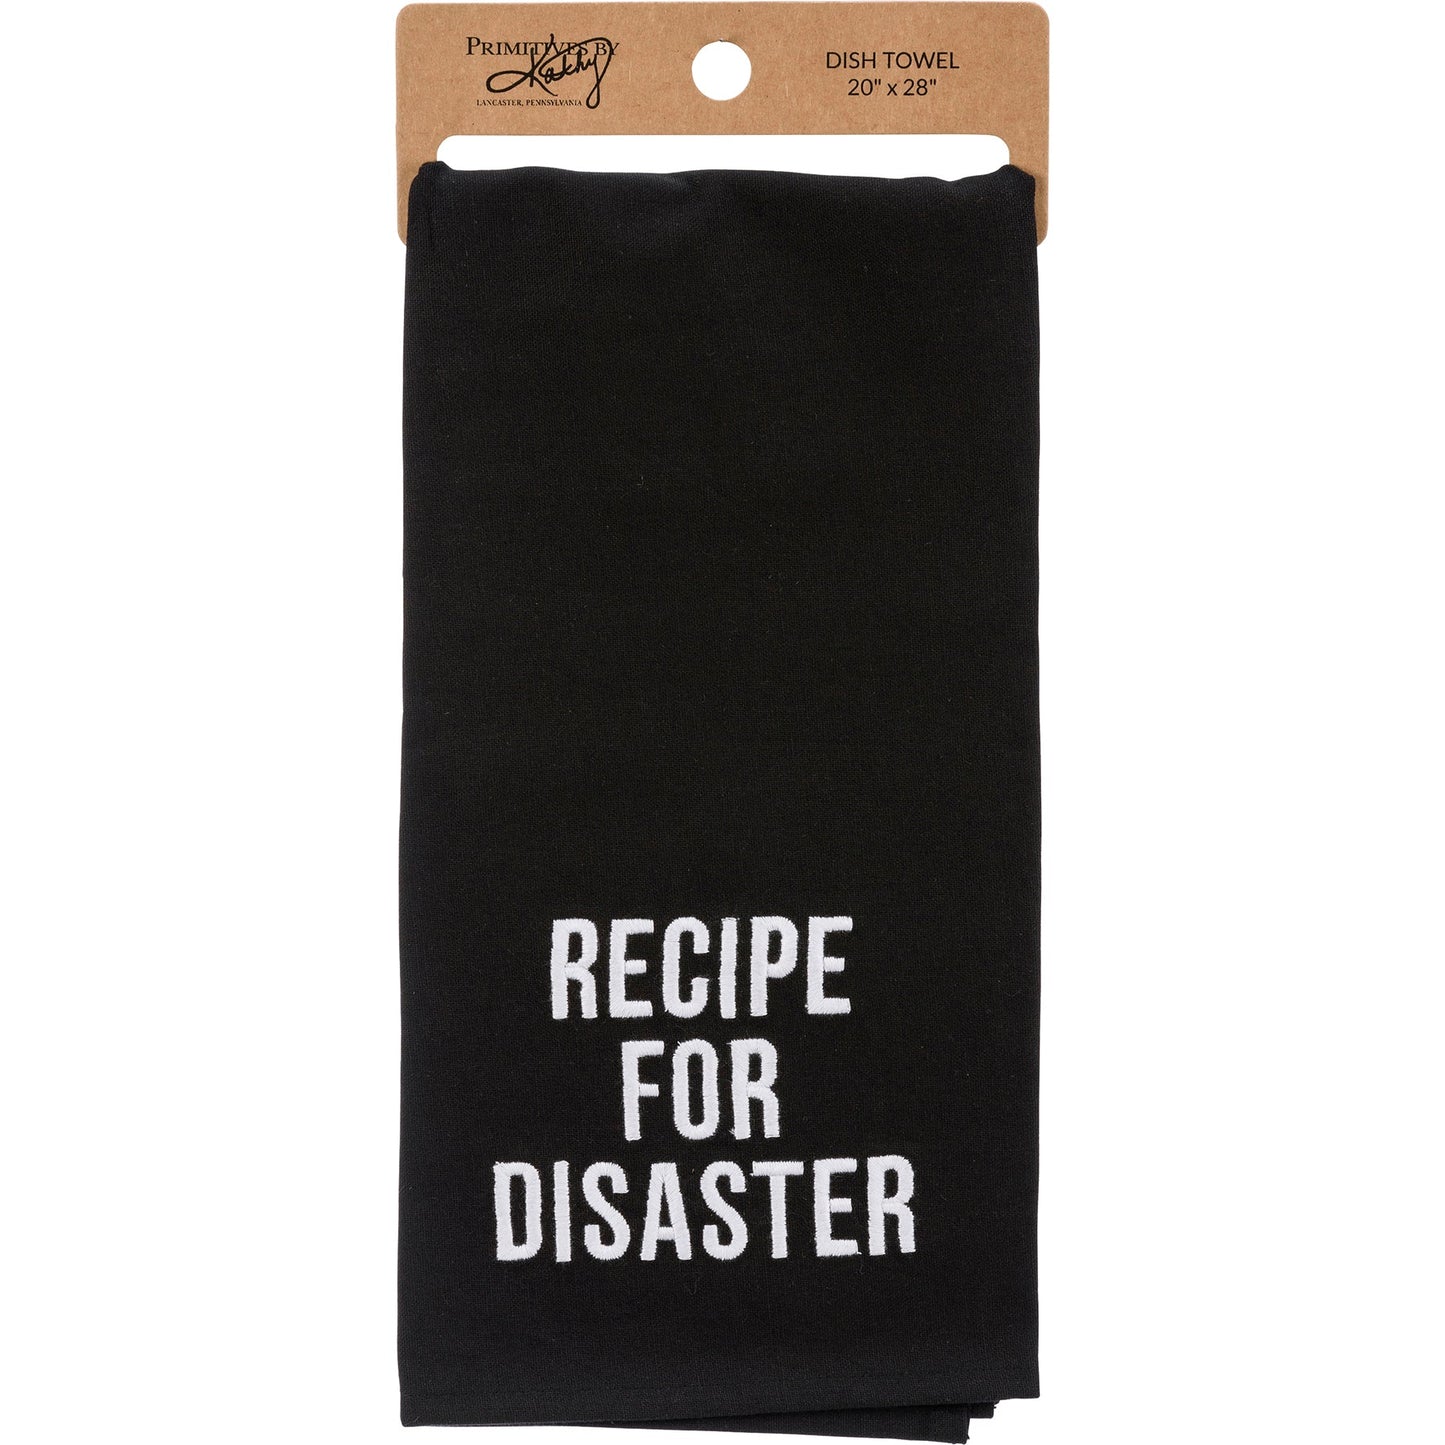 Recipe For Disaster Dish Cloth Towel | Novelty Tea Towel | Embroidered Text | 20" x 28"